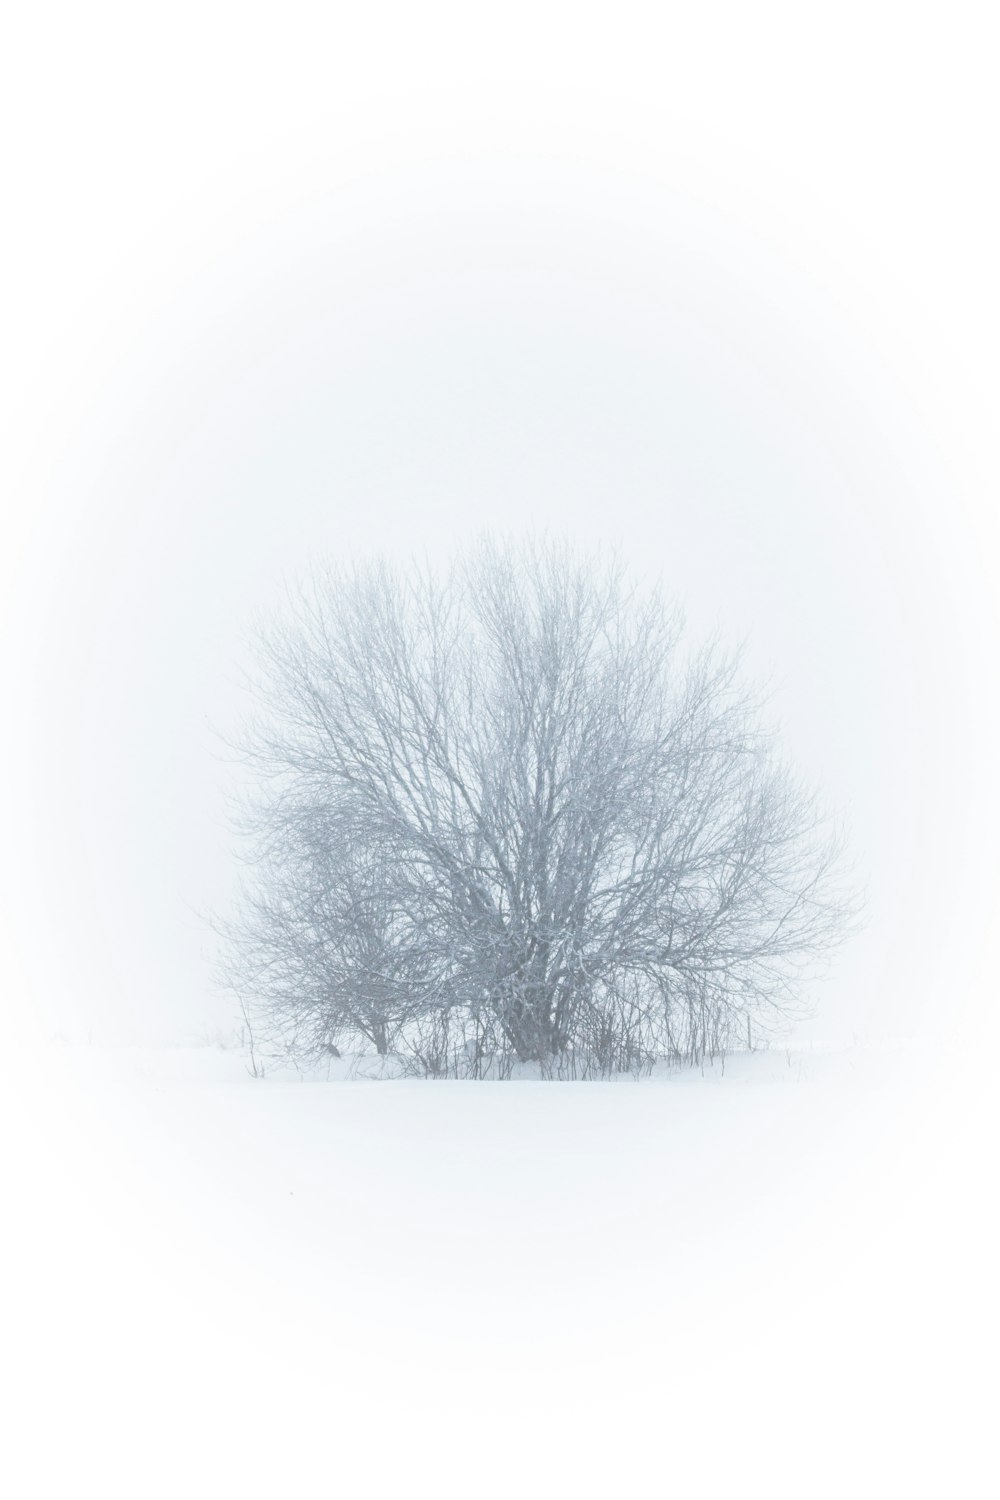 a lone tree in a snow covered field